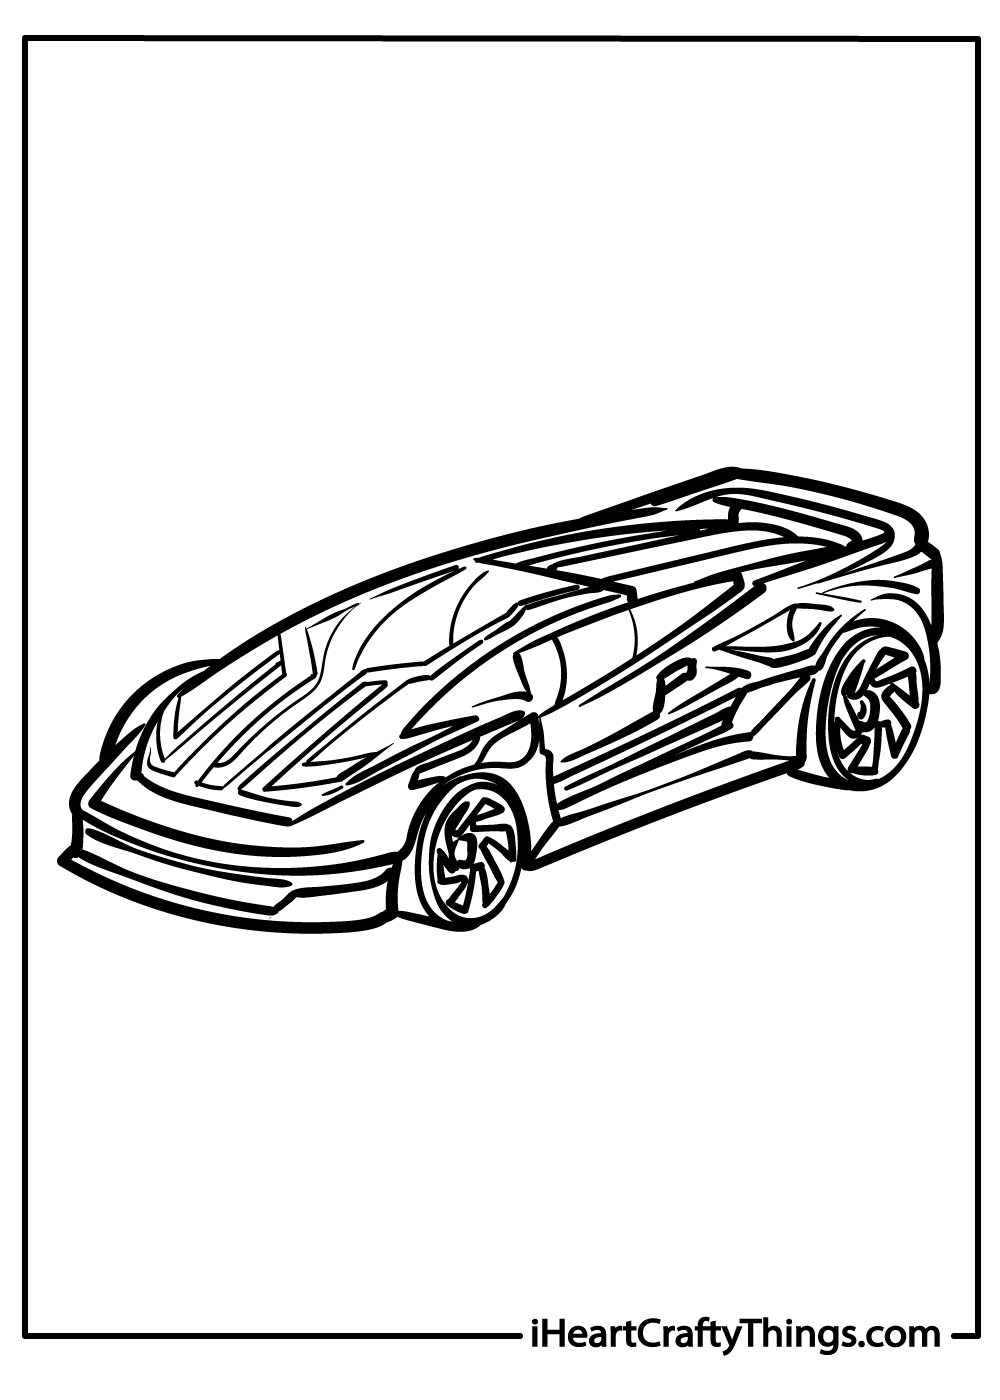 Hot wheels coloring pages free printables